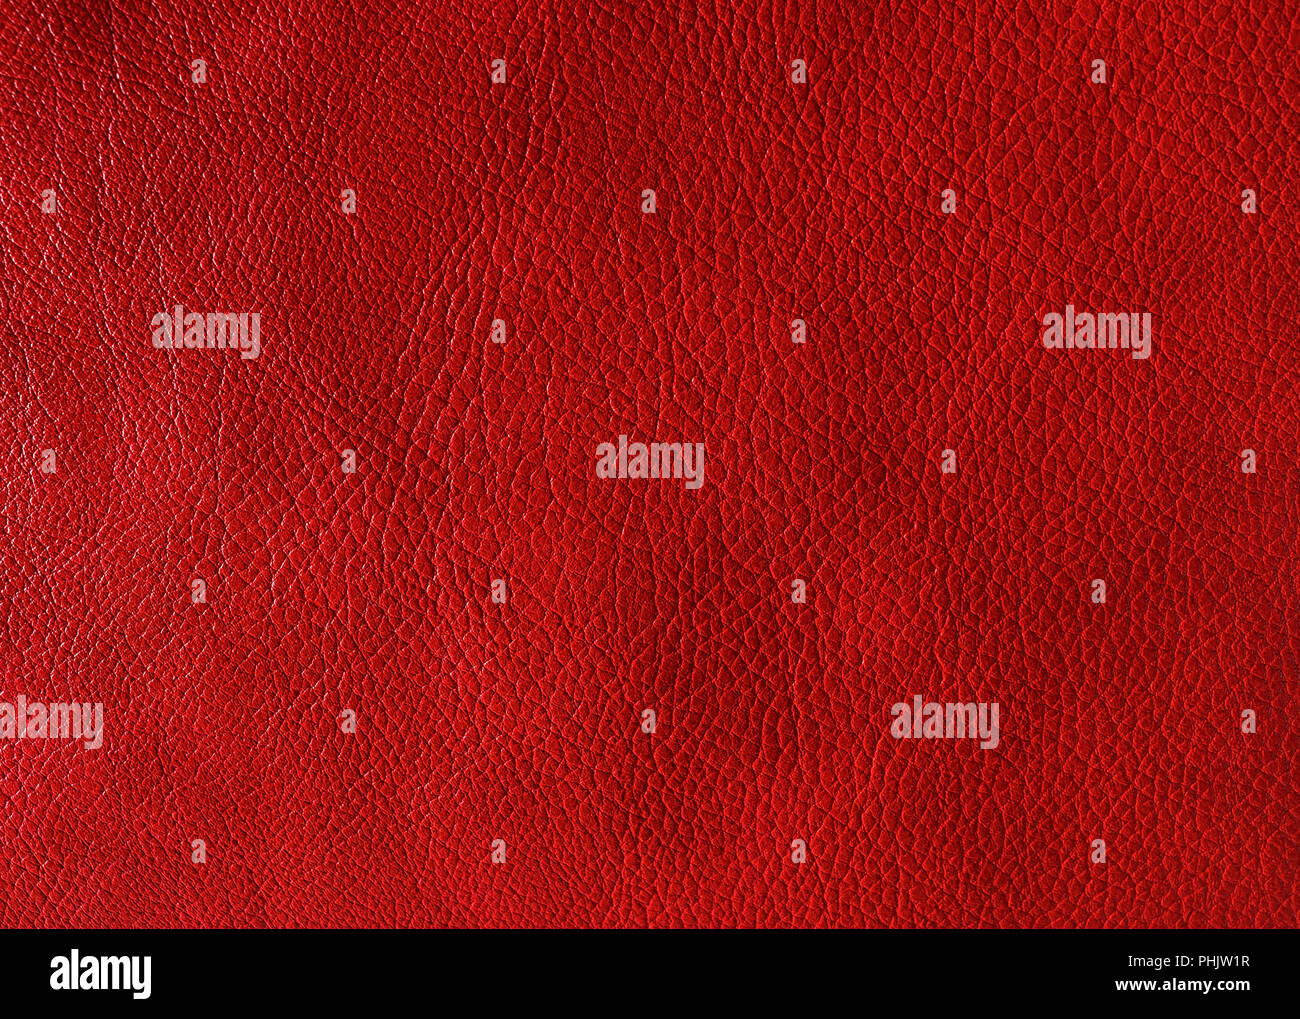 Red leather texture Stock Photo